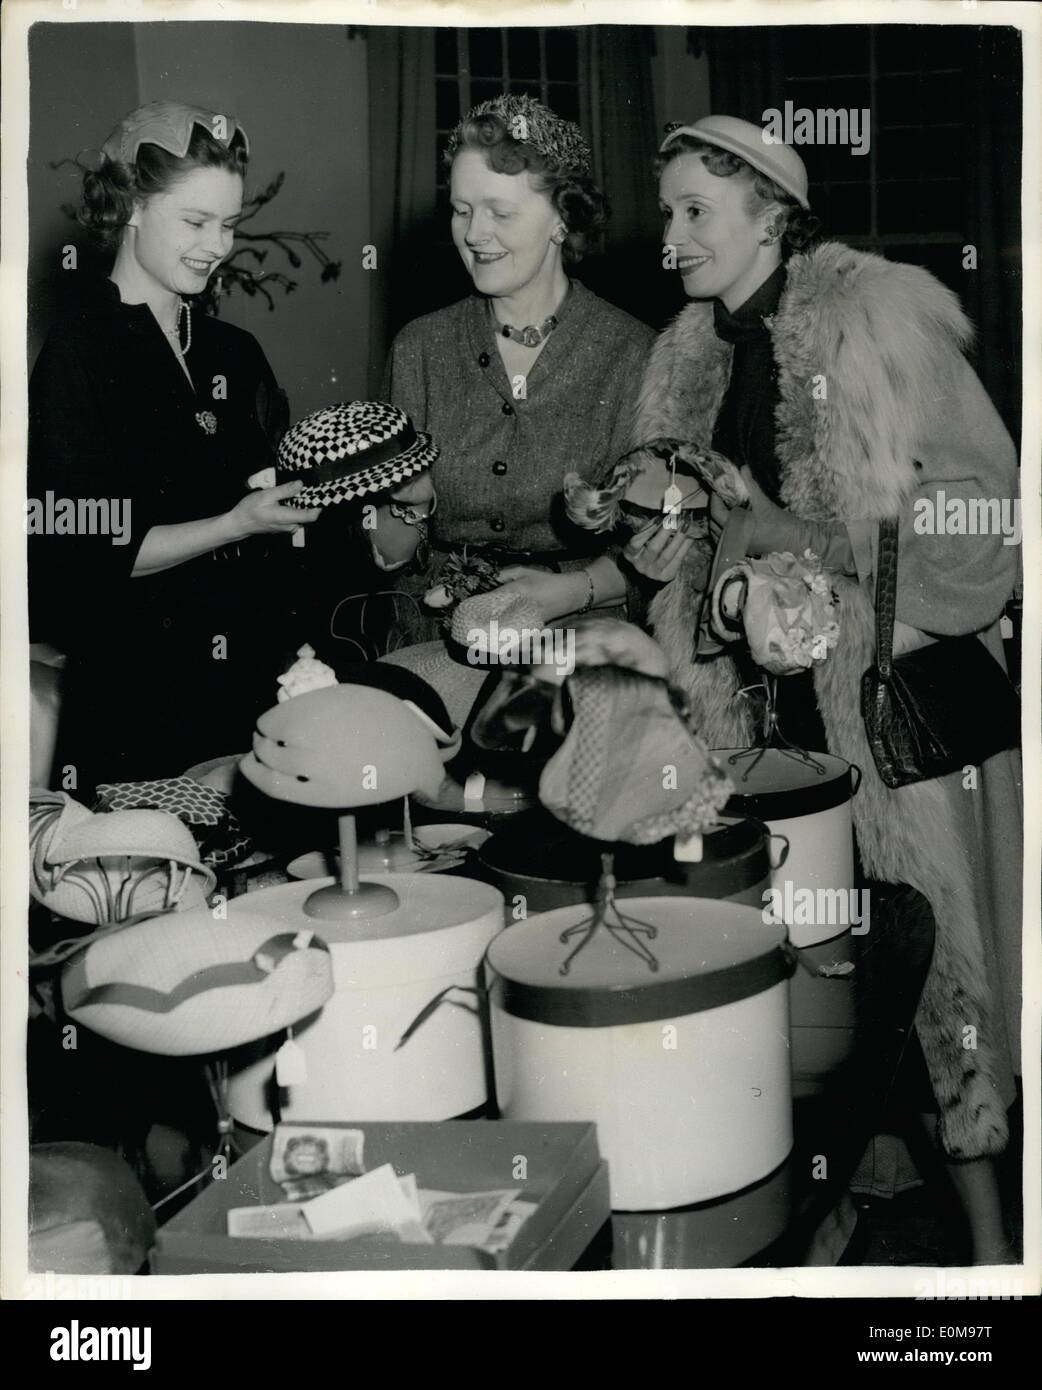 Apr. 04, 1954 - French Film Actress Opens Charity Fair - A Charity Fair was held Yesterday afternoon at the home of Lady Patricia Lennox-Boyd, and was Opened by the French film Actress, Mila Parley - keystone Phto Shows:- On left, The Luchess of Rutland who to the Chairman, admired a in at the fair. On the right is French film actress, Mila Parley, who opened the fair. Stock Photo